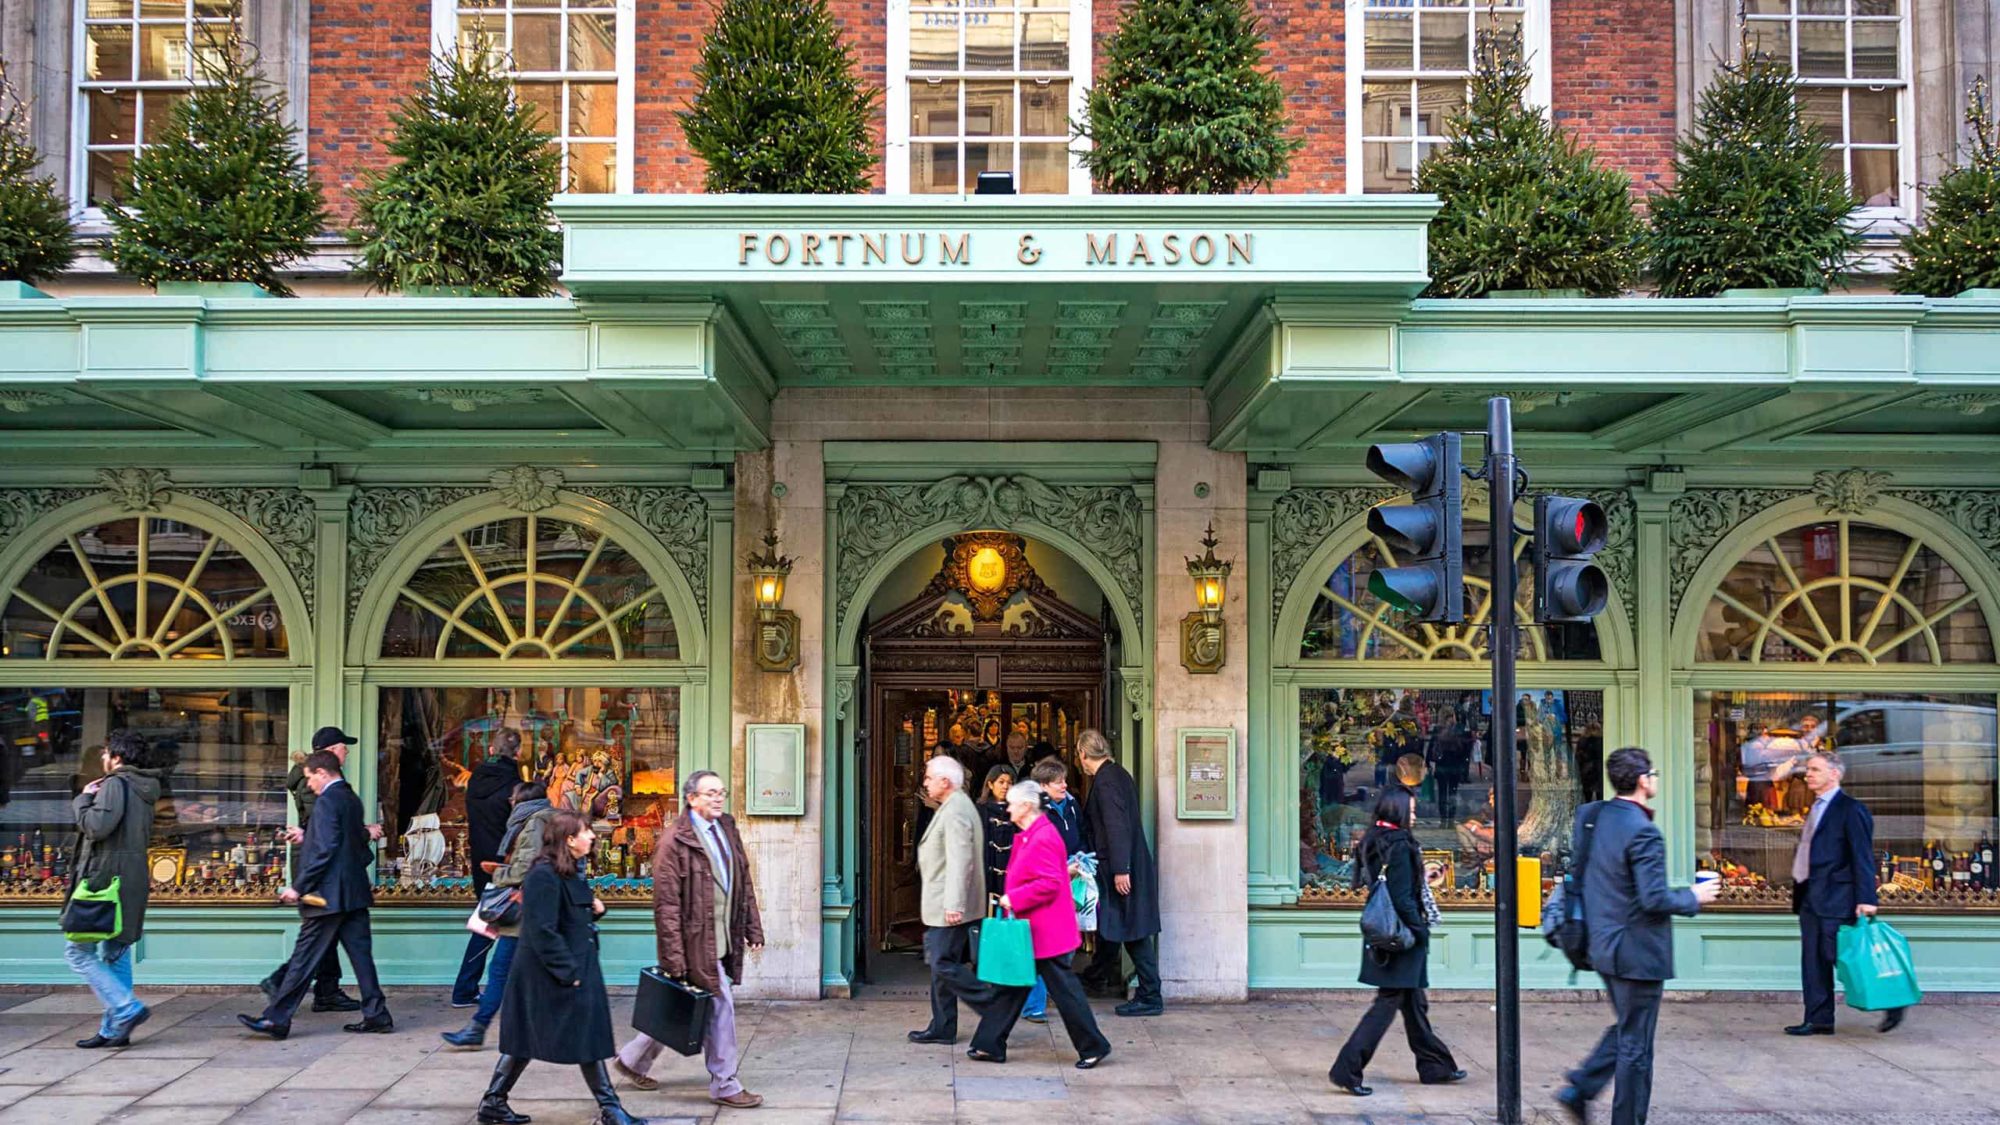 How Fortnum & Mason keep its organisational values, culture and sense of joy alive during the pandemic